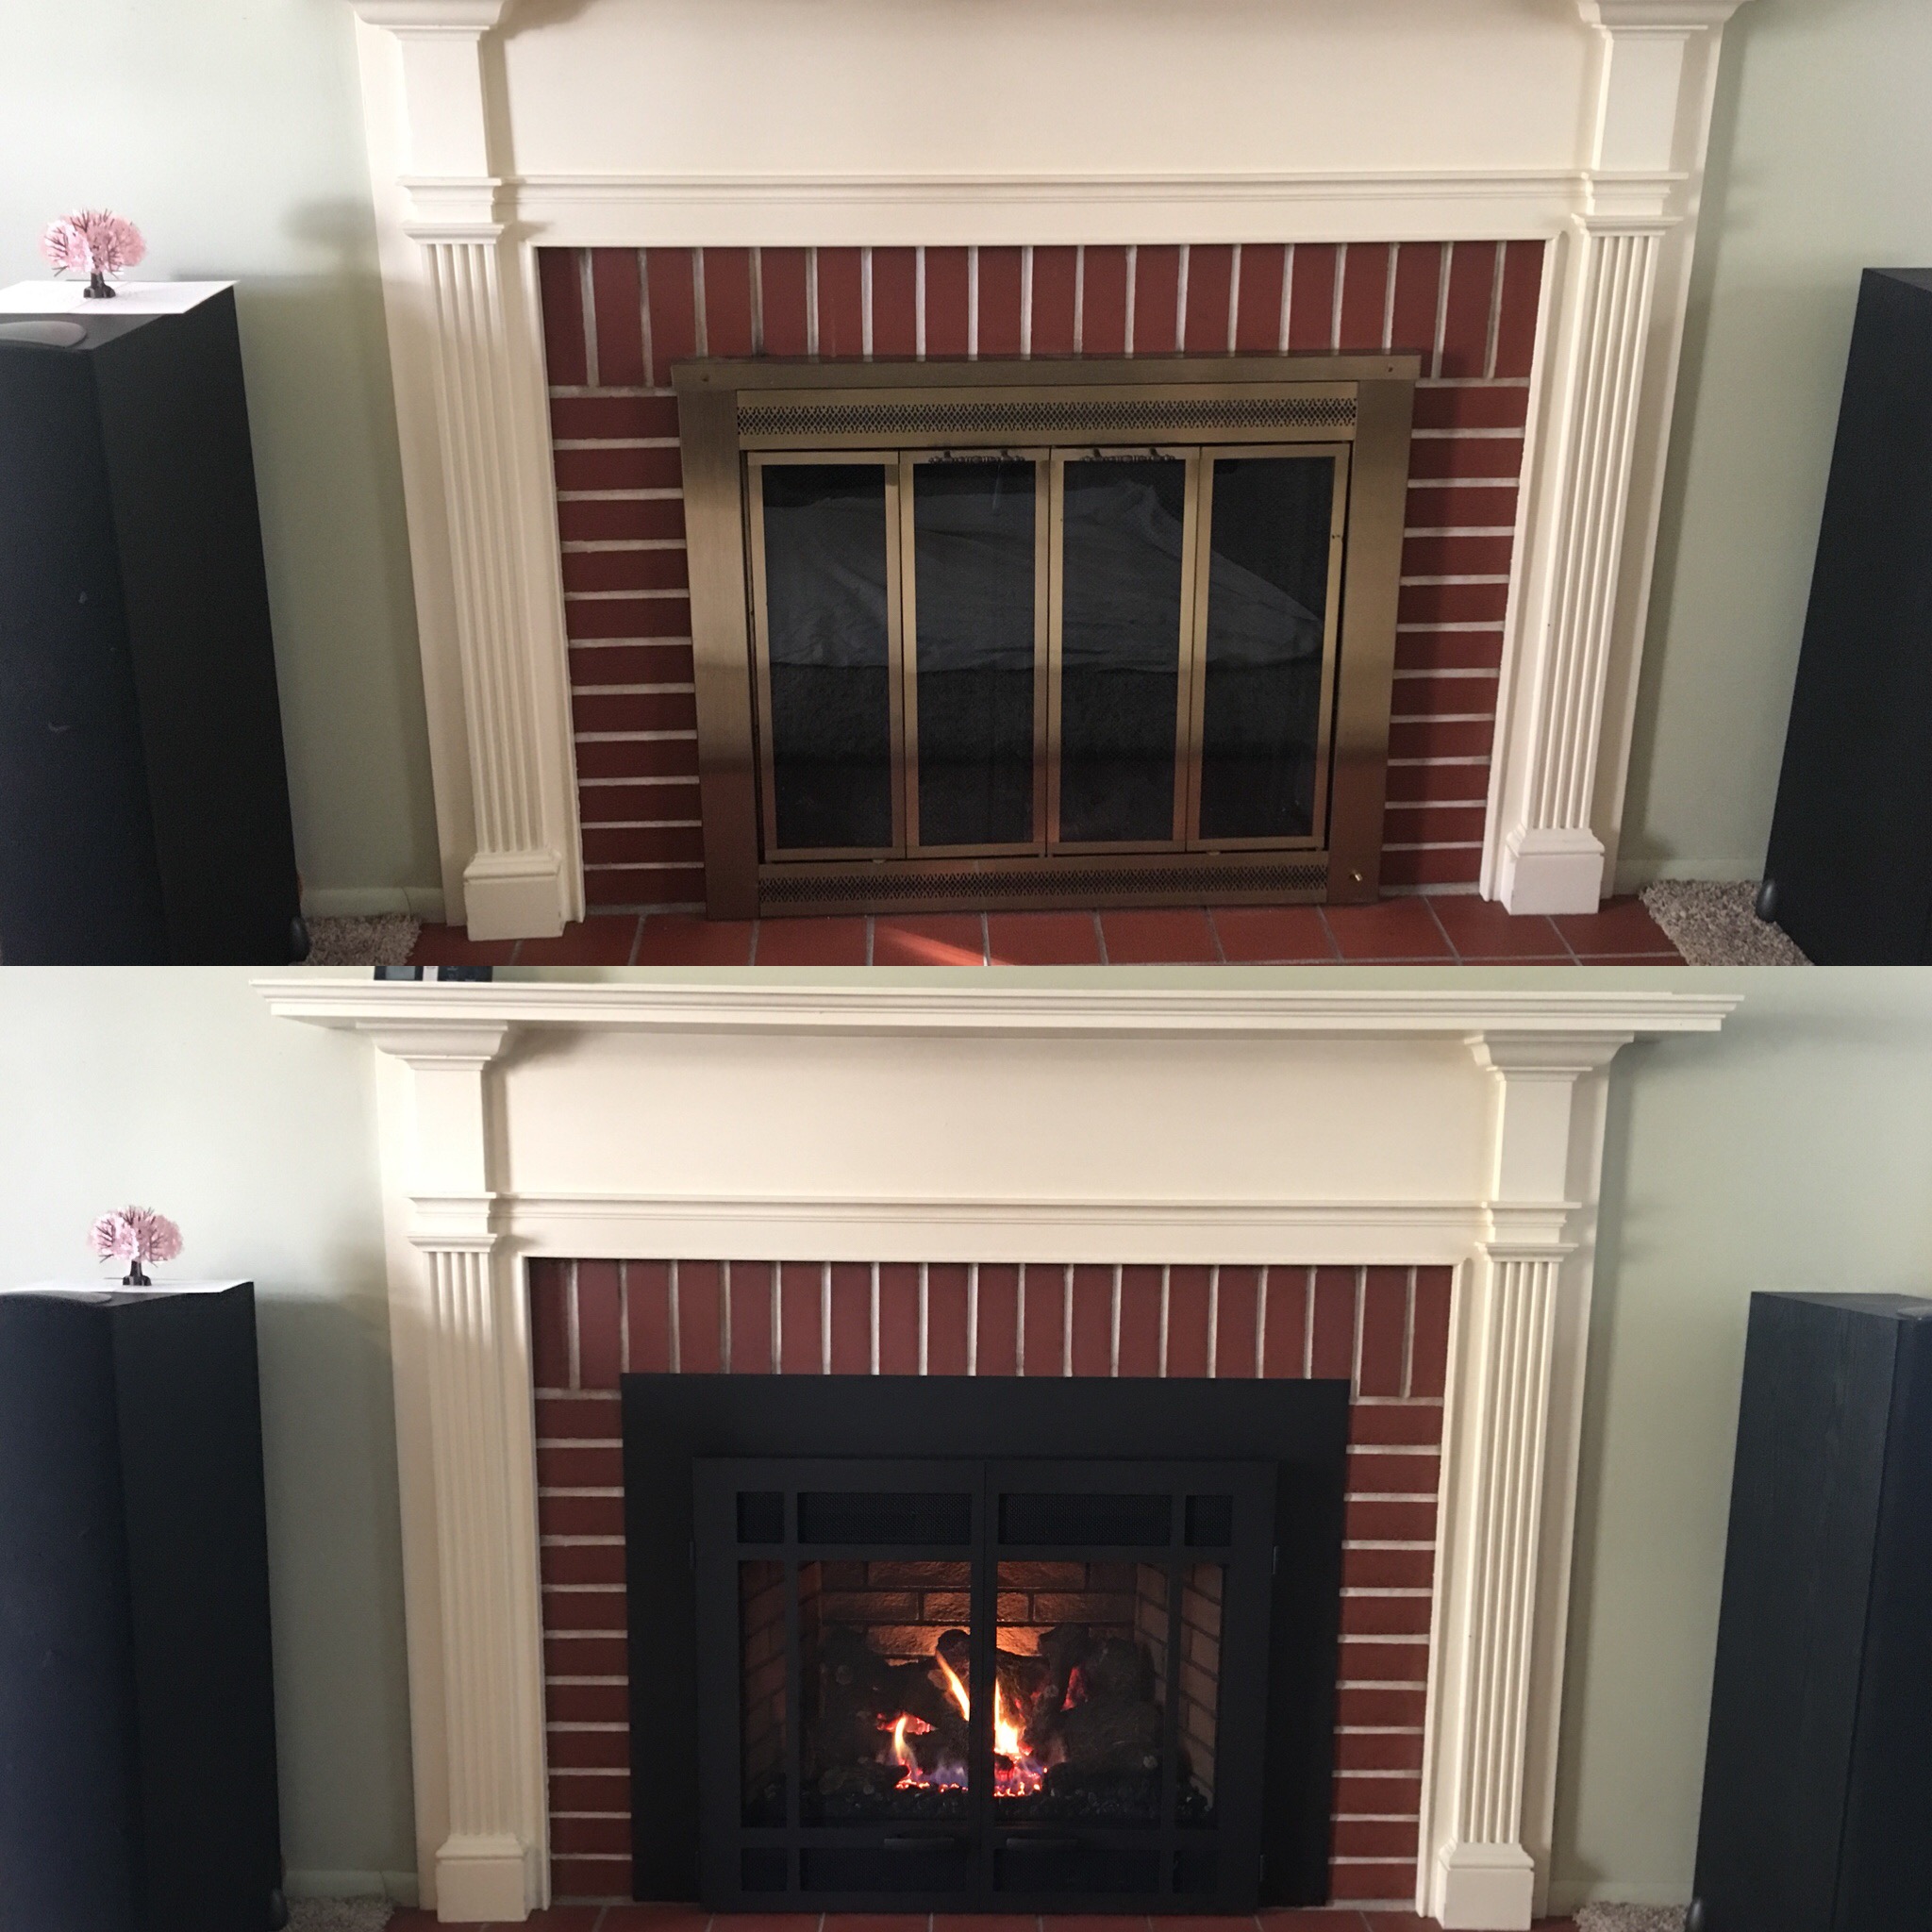 Image of a traditional 34DVL gas insert by Fireplace Xtordinair and the preexisting masonry fireplace as the before.